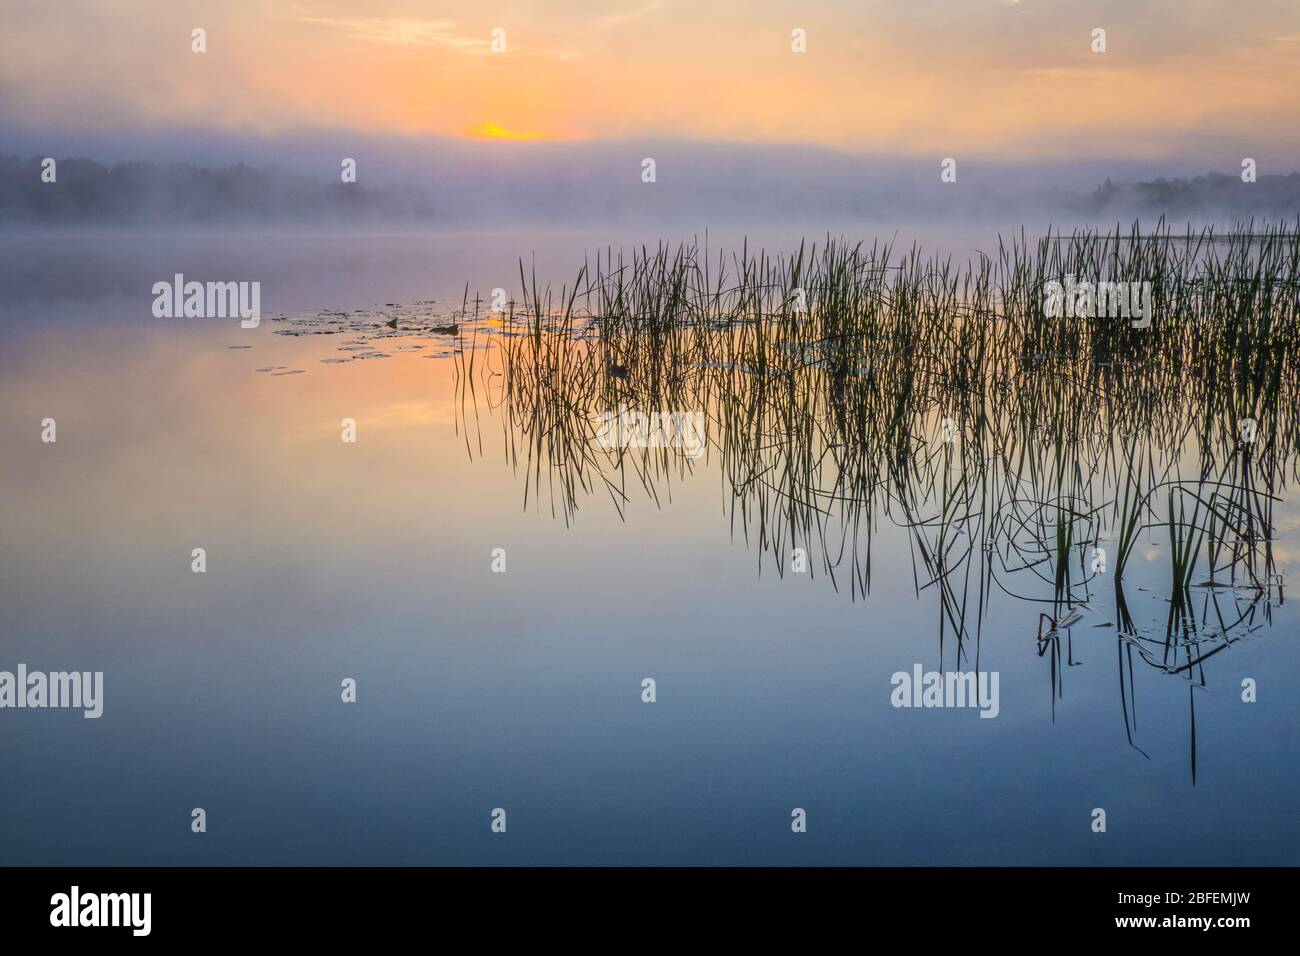 Dark moody landscape of a purple and orange sunrise over clouds that highlights fog over a still lake with grass reflected in the water. Stock Photo